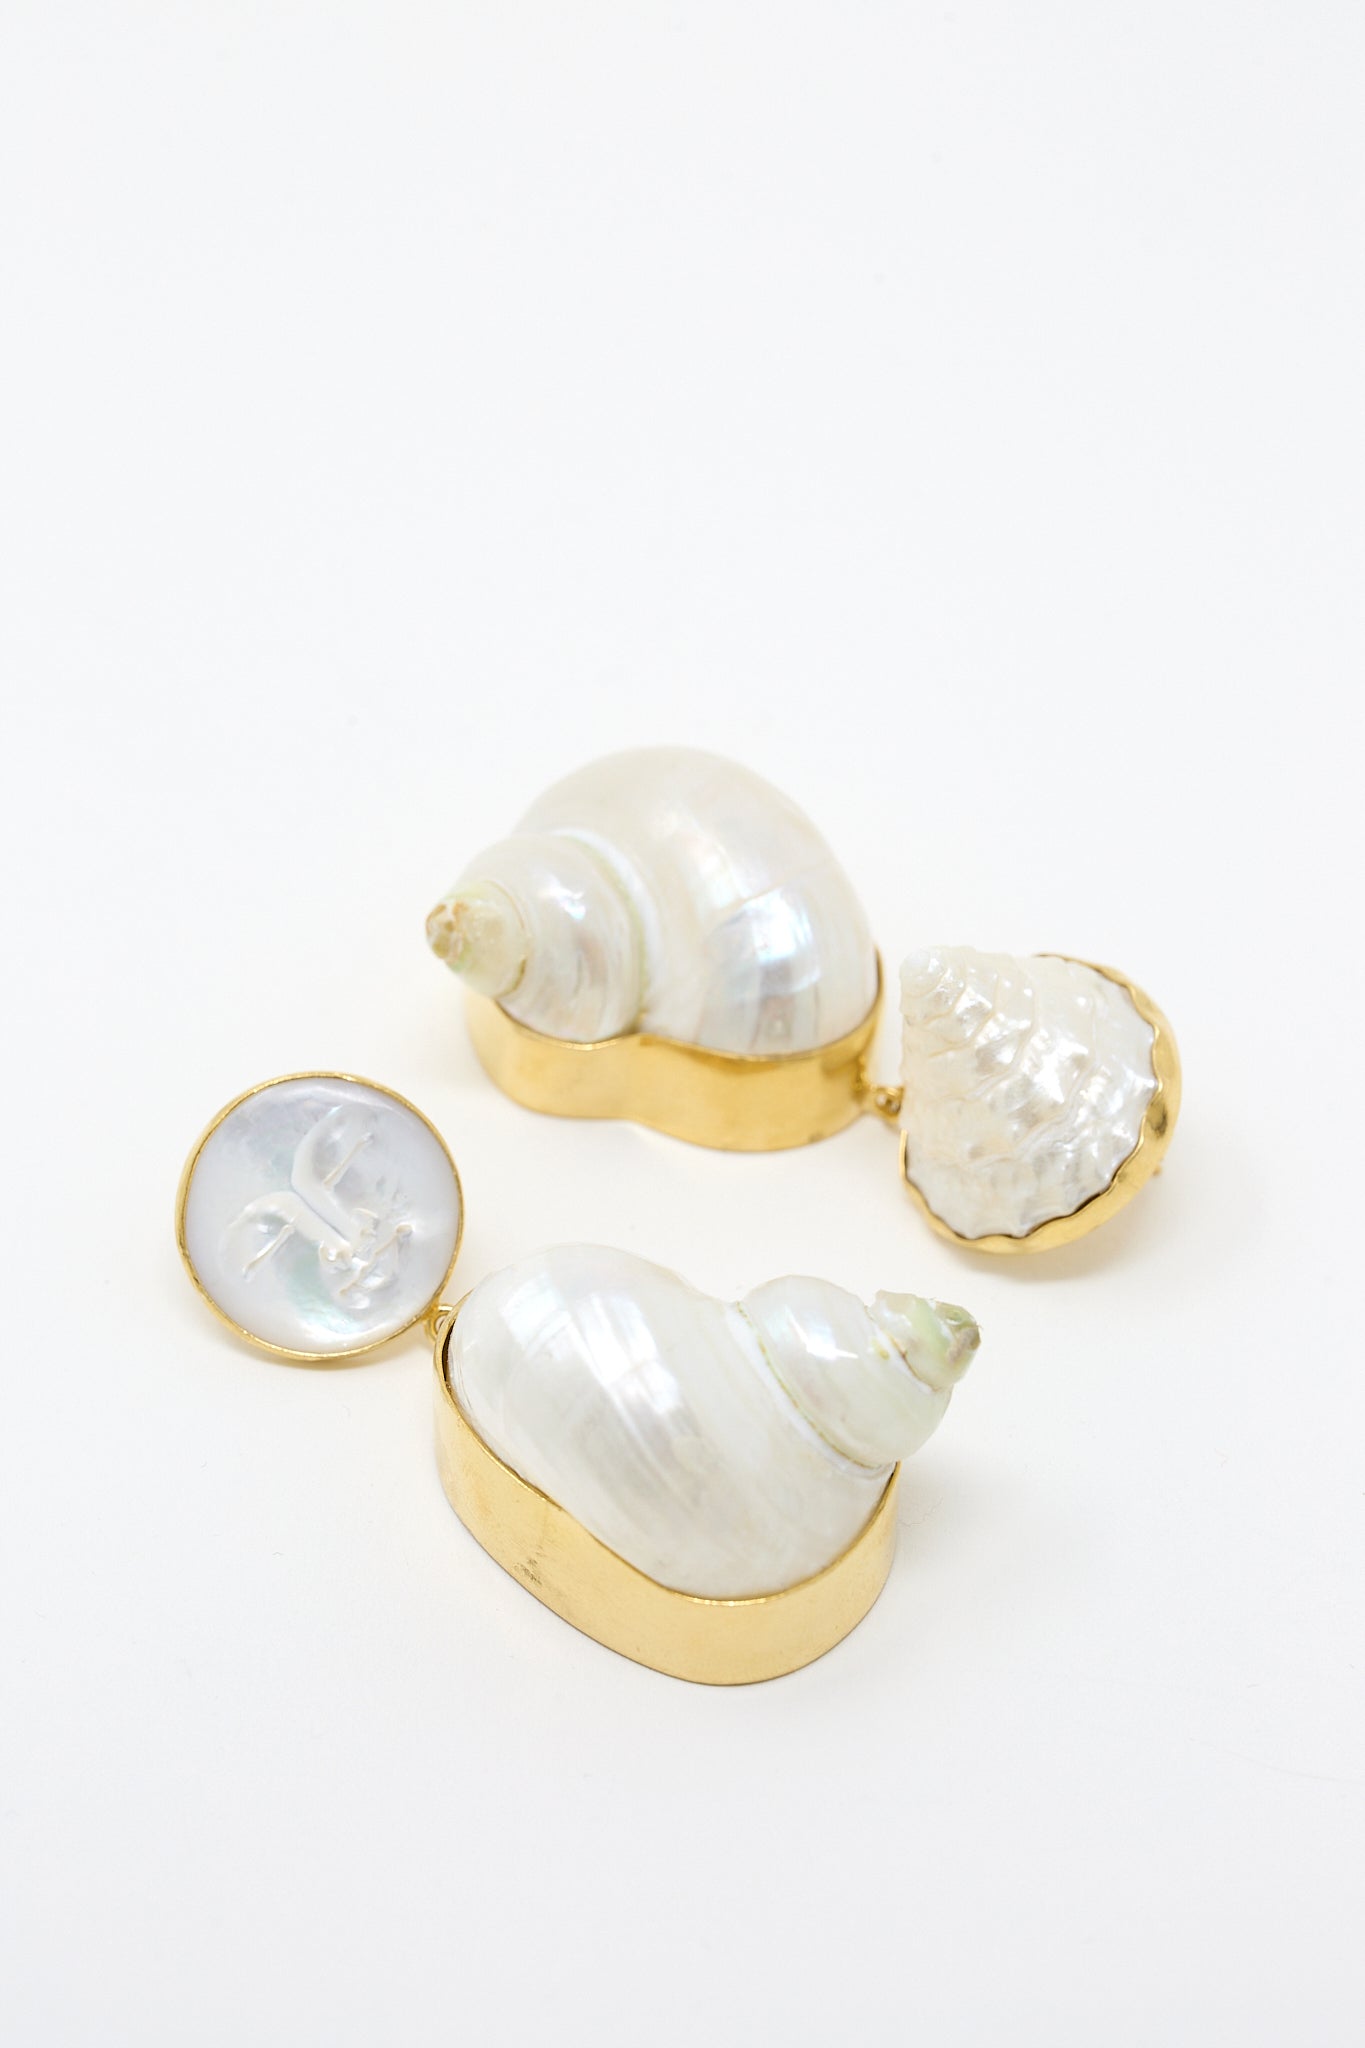 A pair of Grainne Morton Moon and Star Shell Drop Earrings in 18K gold-plated silver on a white surface.